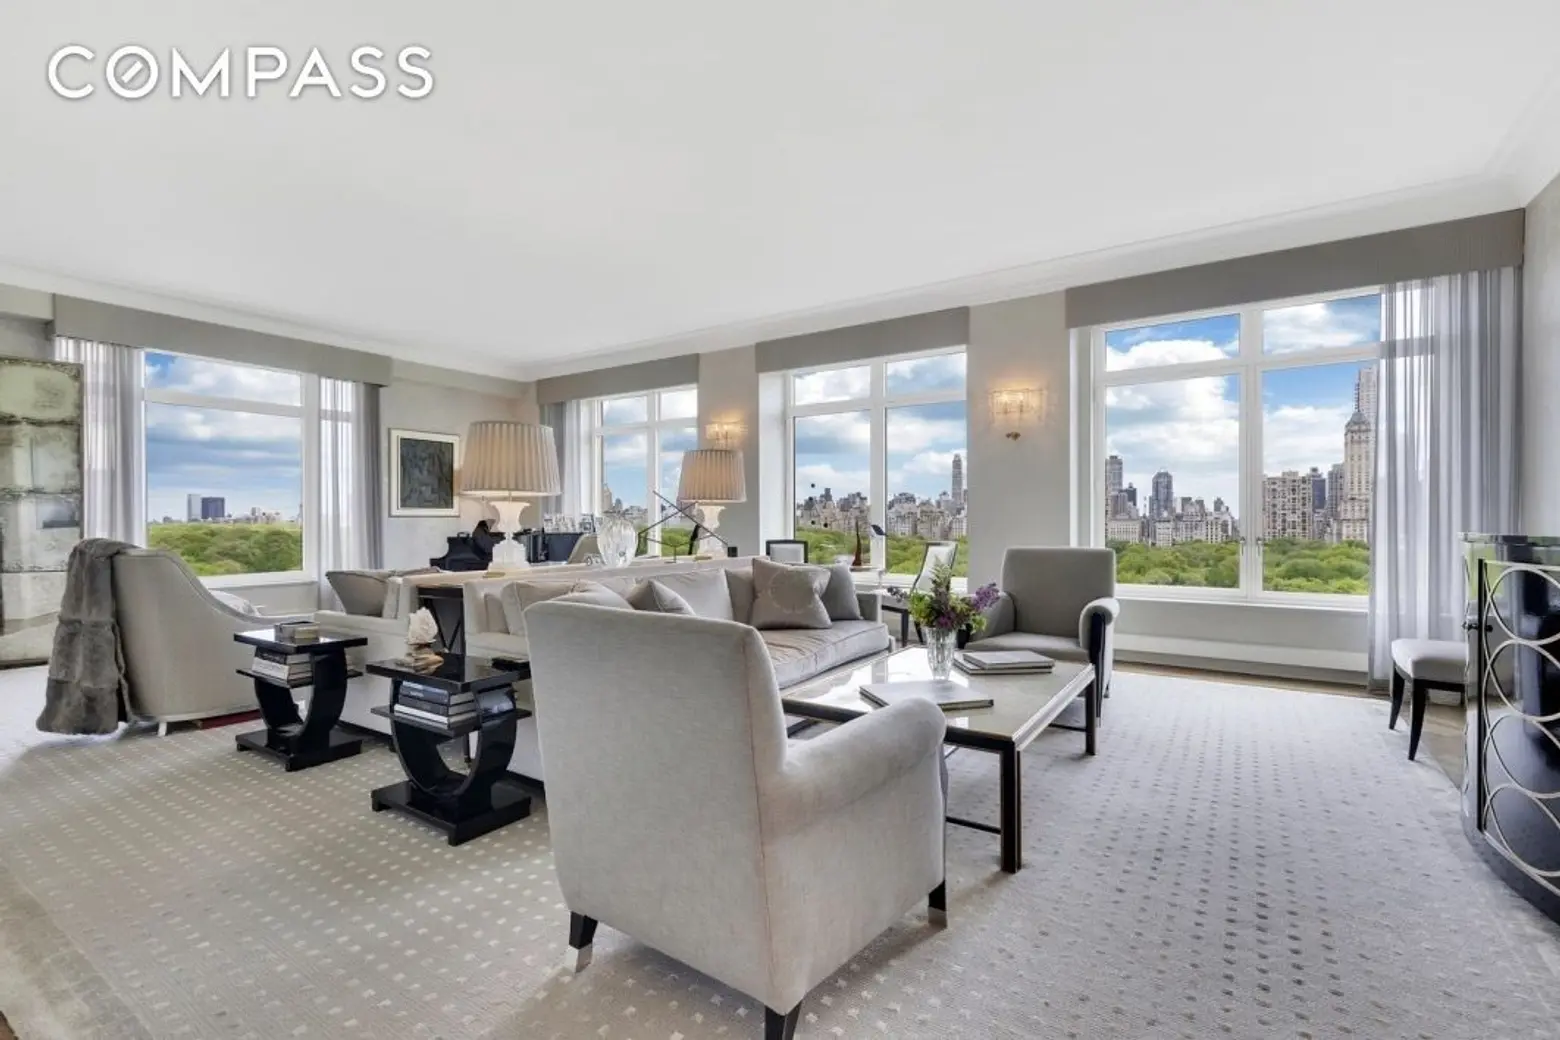 Philanthropist’s condo at 15 Central Park West sells for $8.5M under ask